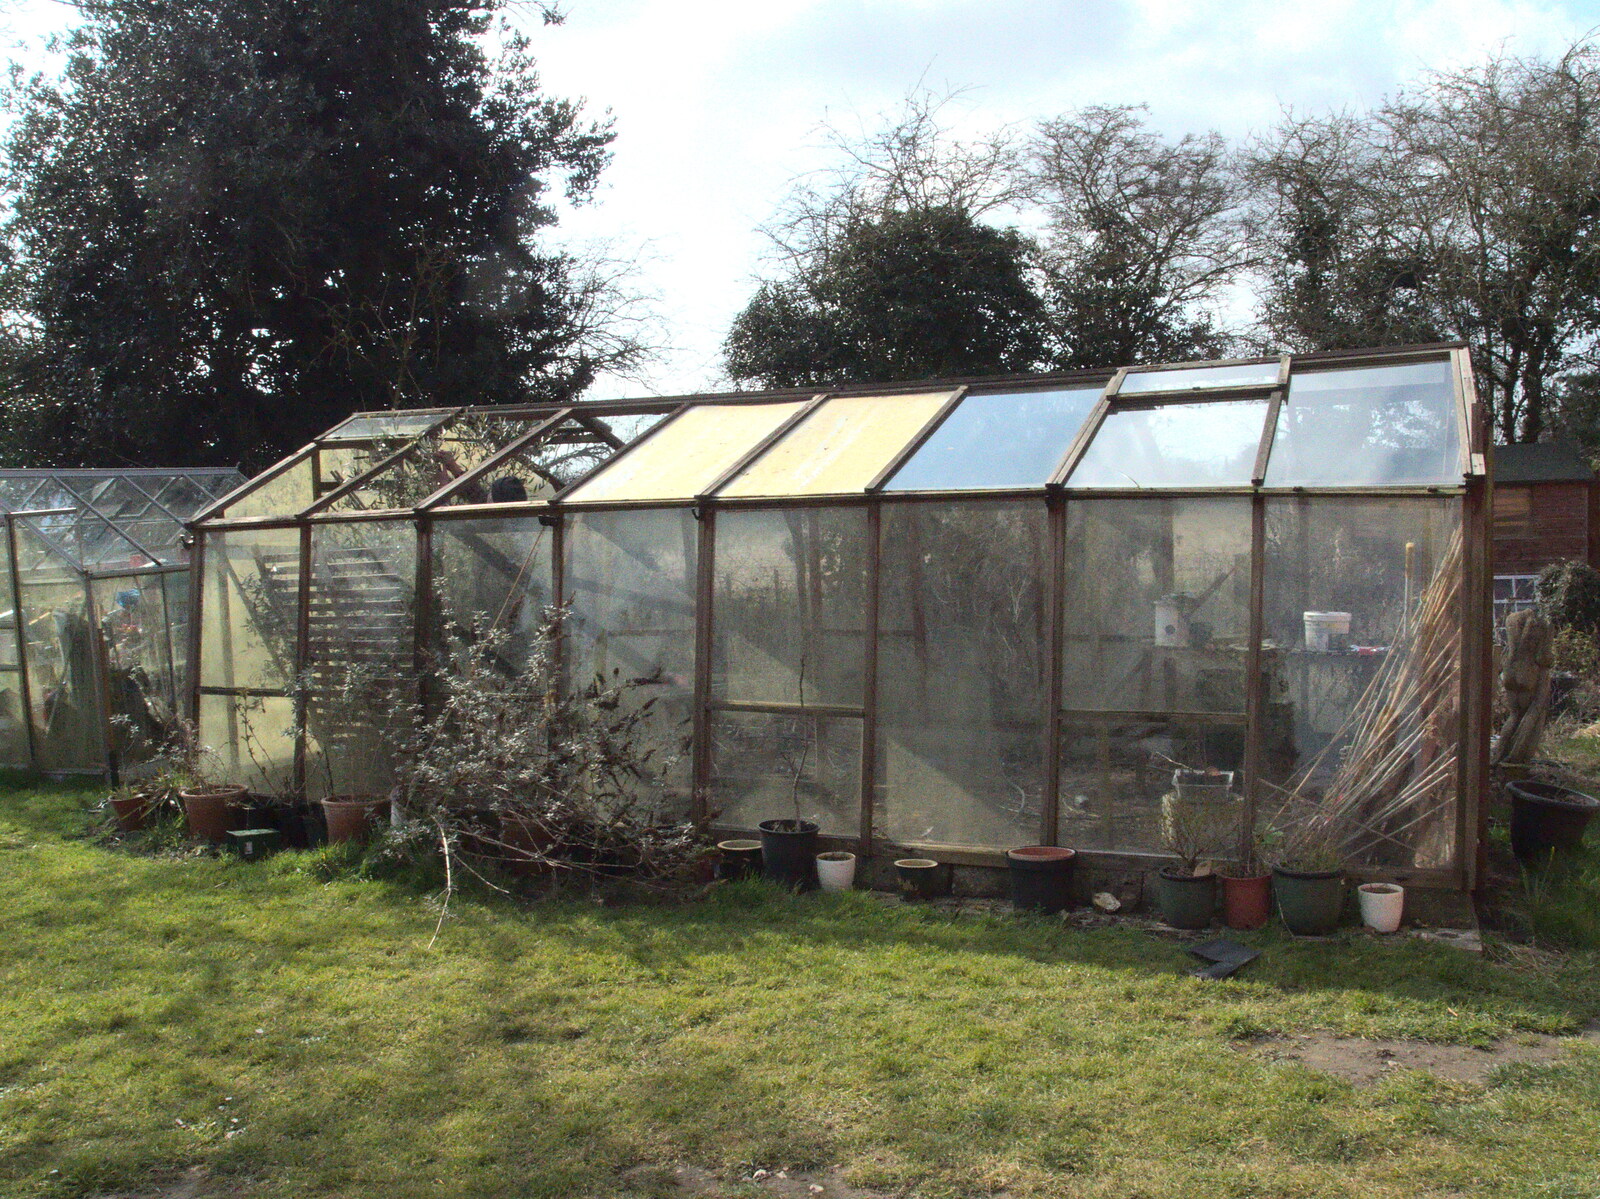 The greenhouse is in a bit of a state from A Crashed Car and Greenhouse Demolition, Brome, Suffolk - 20th March 2015